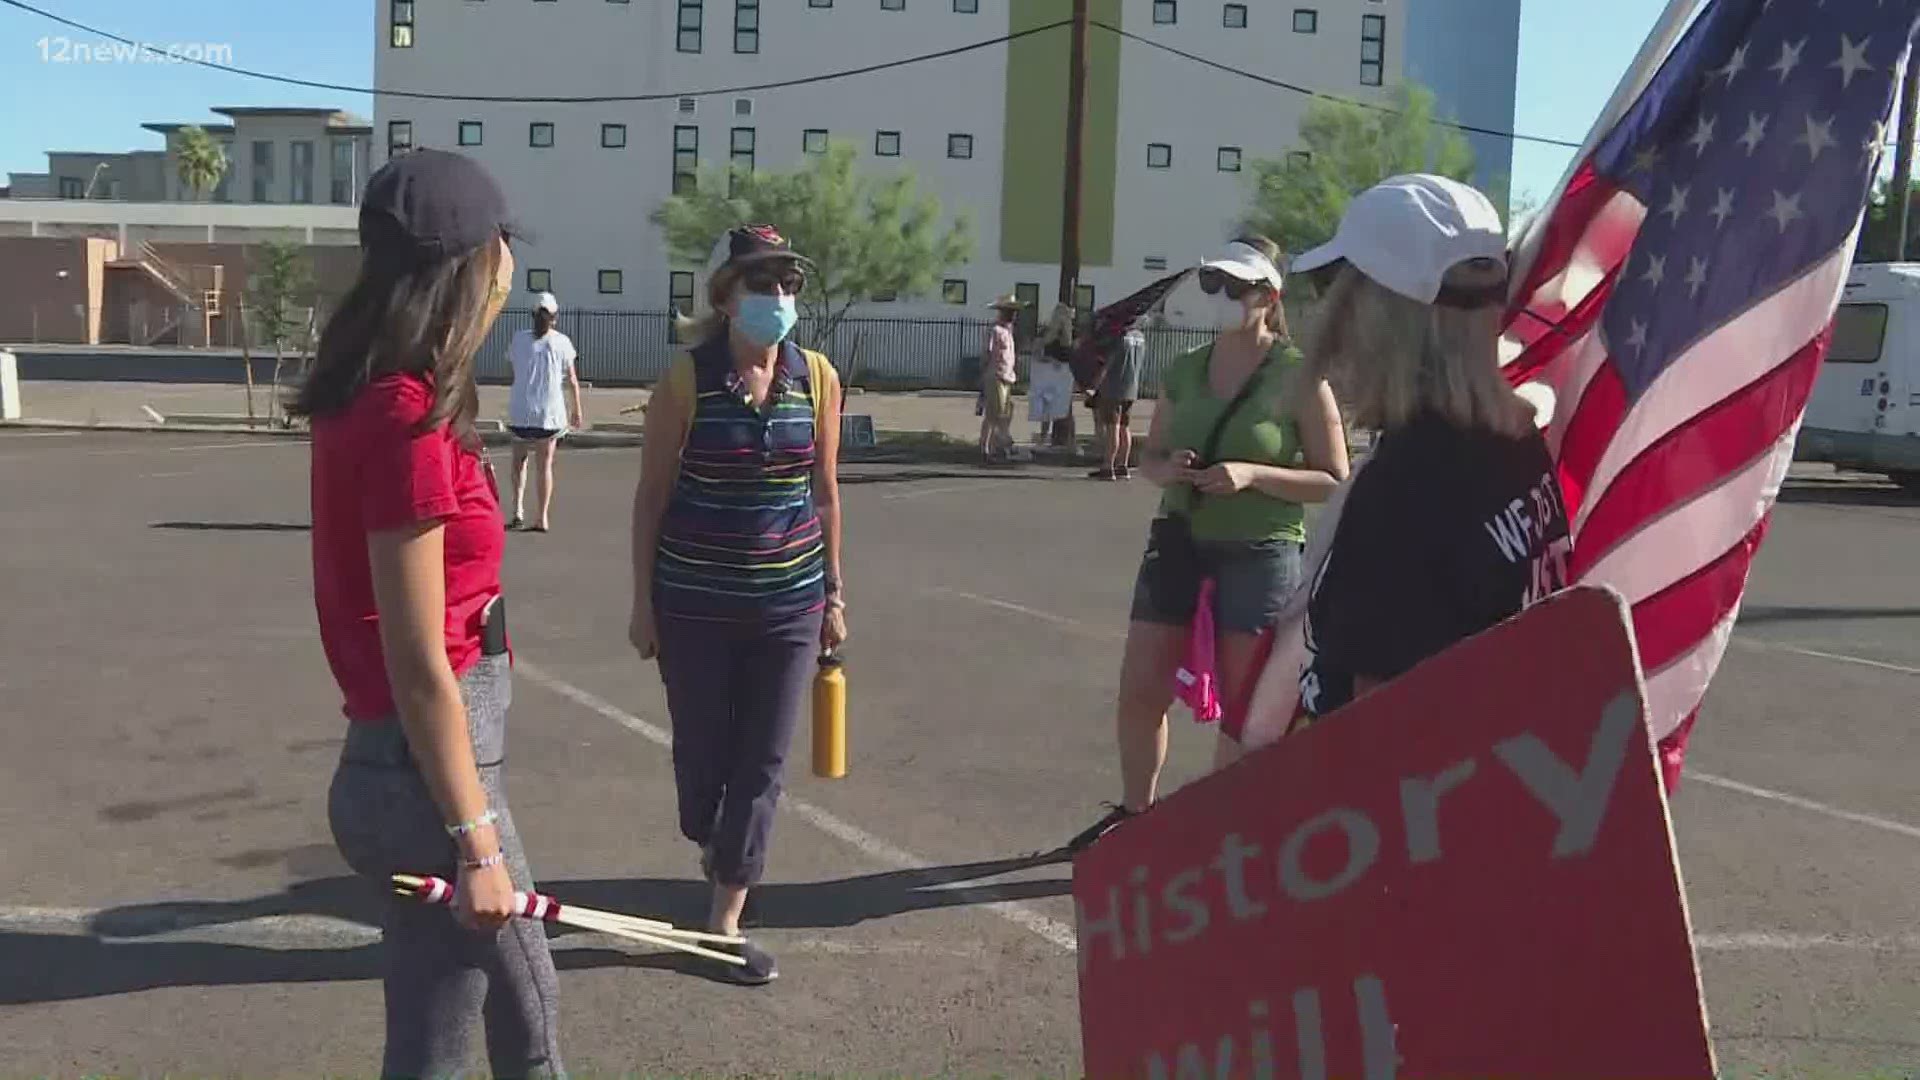 First Church United Church of Christ in Phoenix held a "White Silence is Violence" march Sunday morning. Team 12's Matt Yurus was live at the scene.